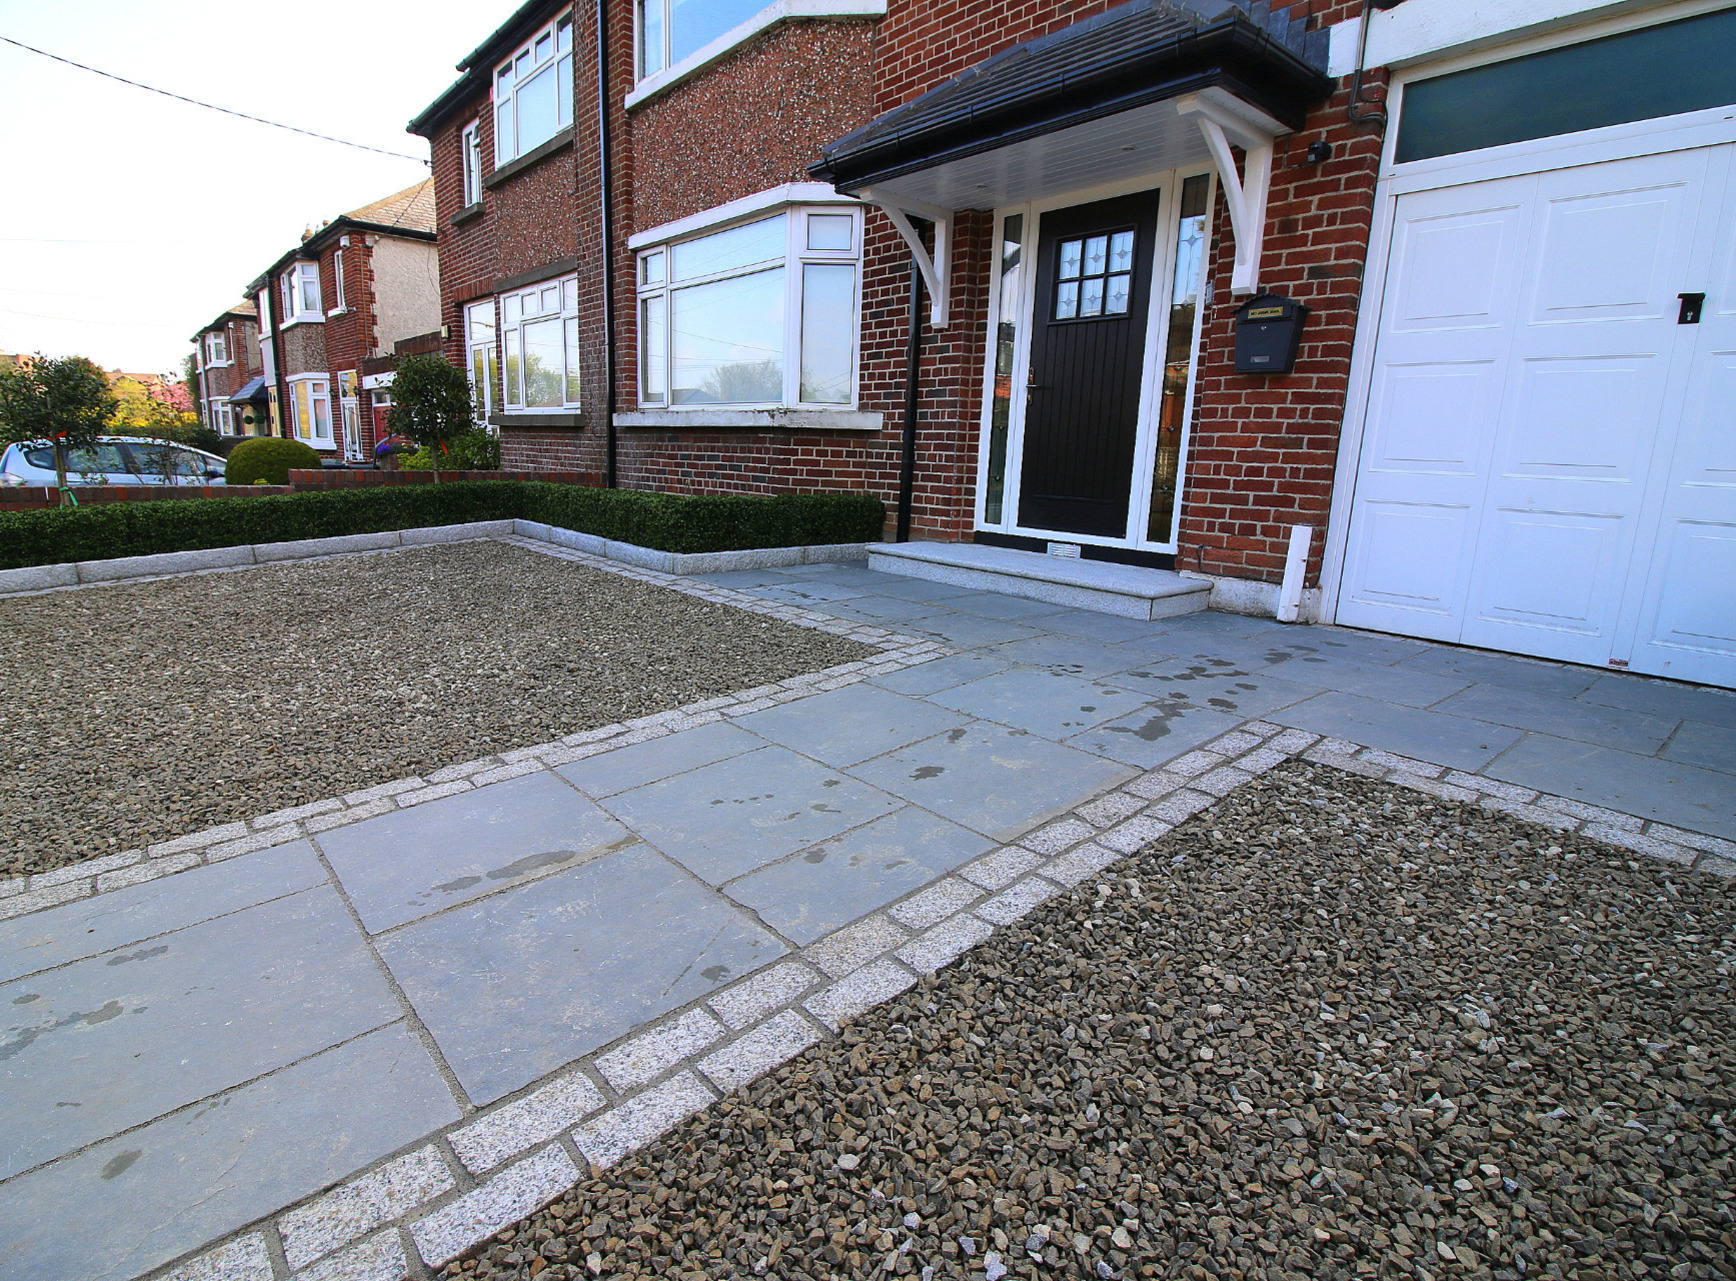 Driveway Design featuring Limestone & Granite paving stone with looses stone chippings | Dublin 14